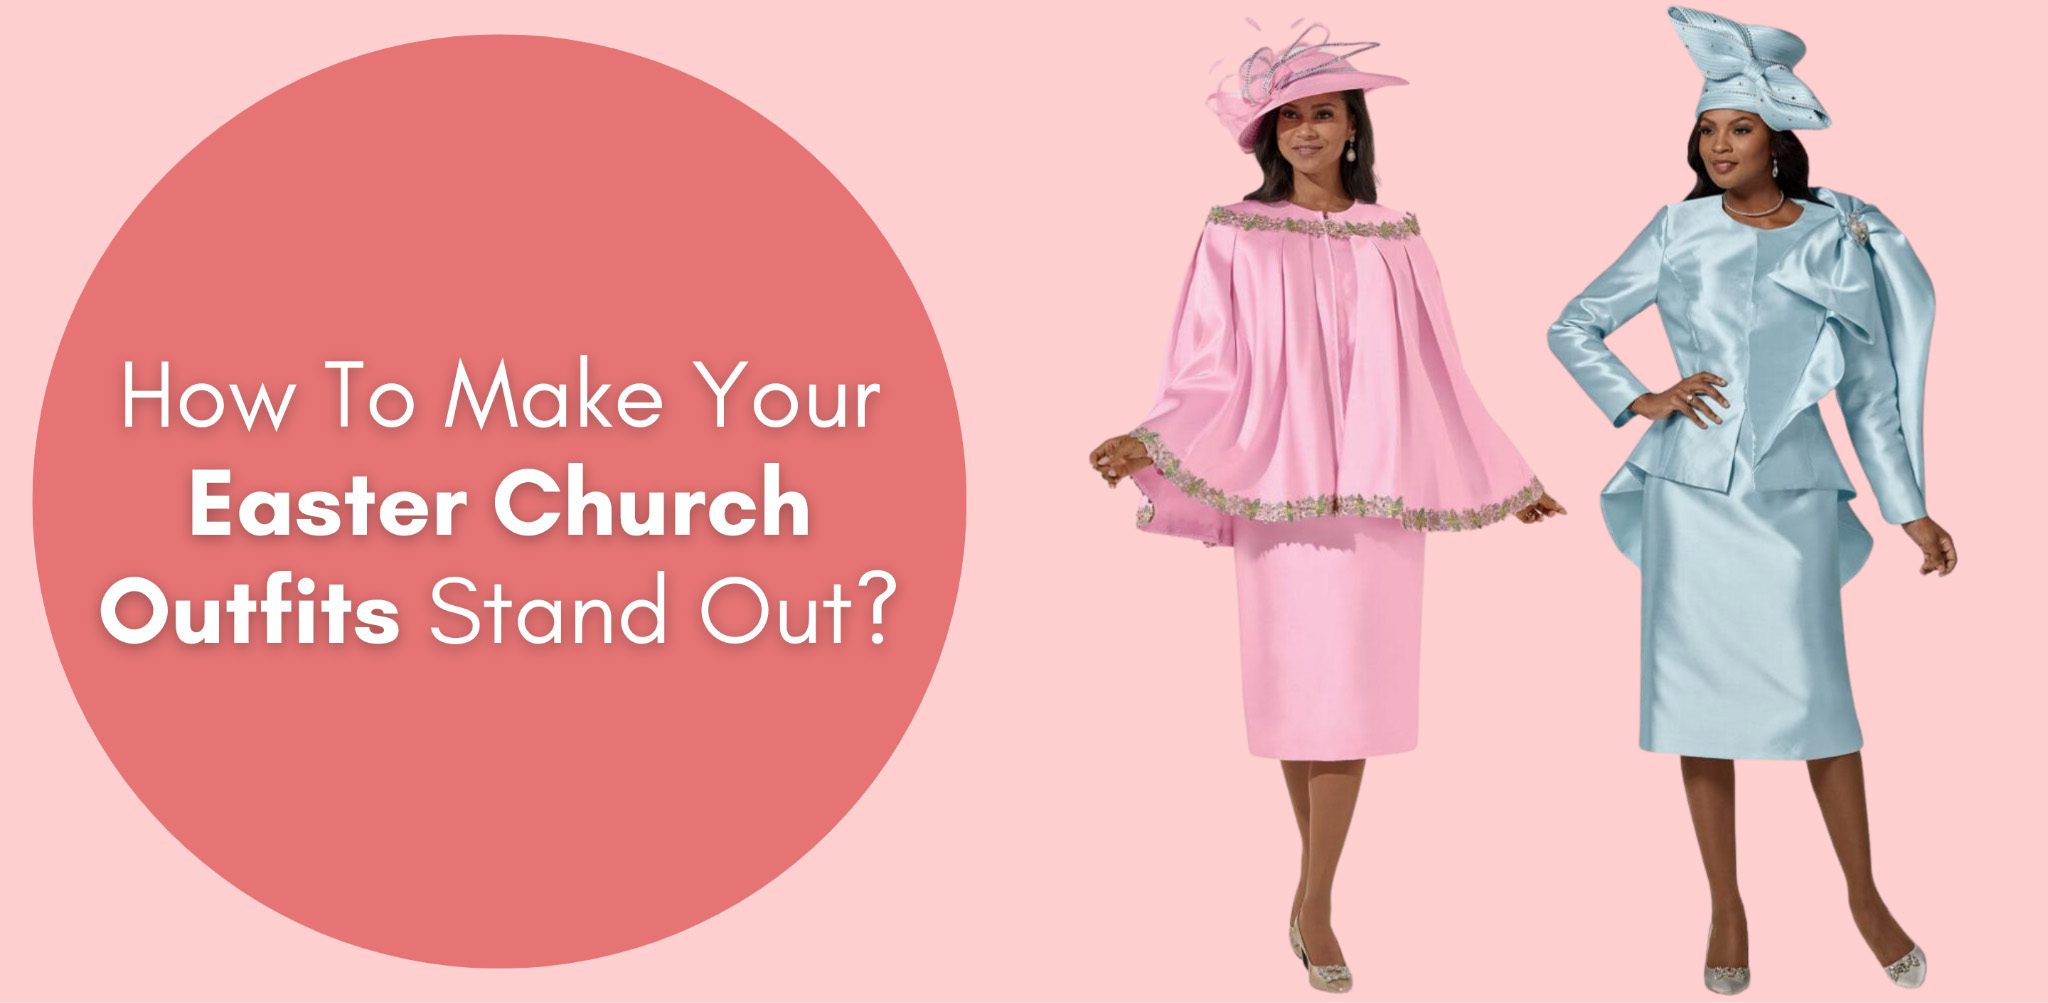 How To Make Your Easter Church Outfits Stand Out?